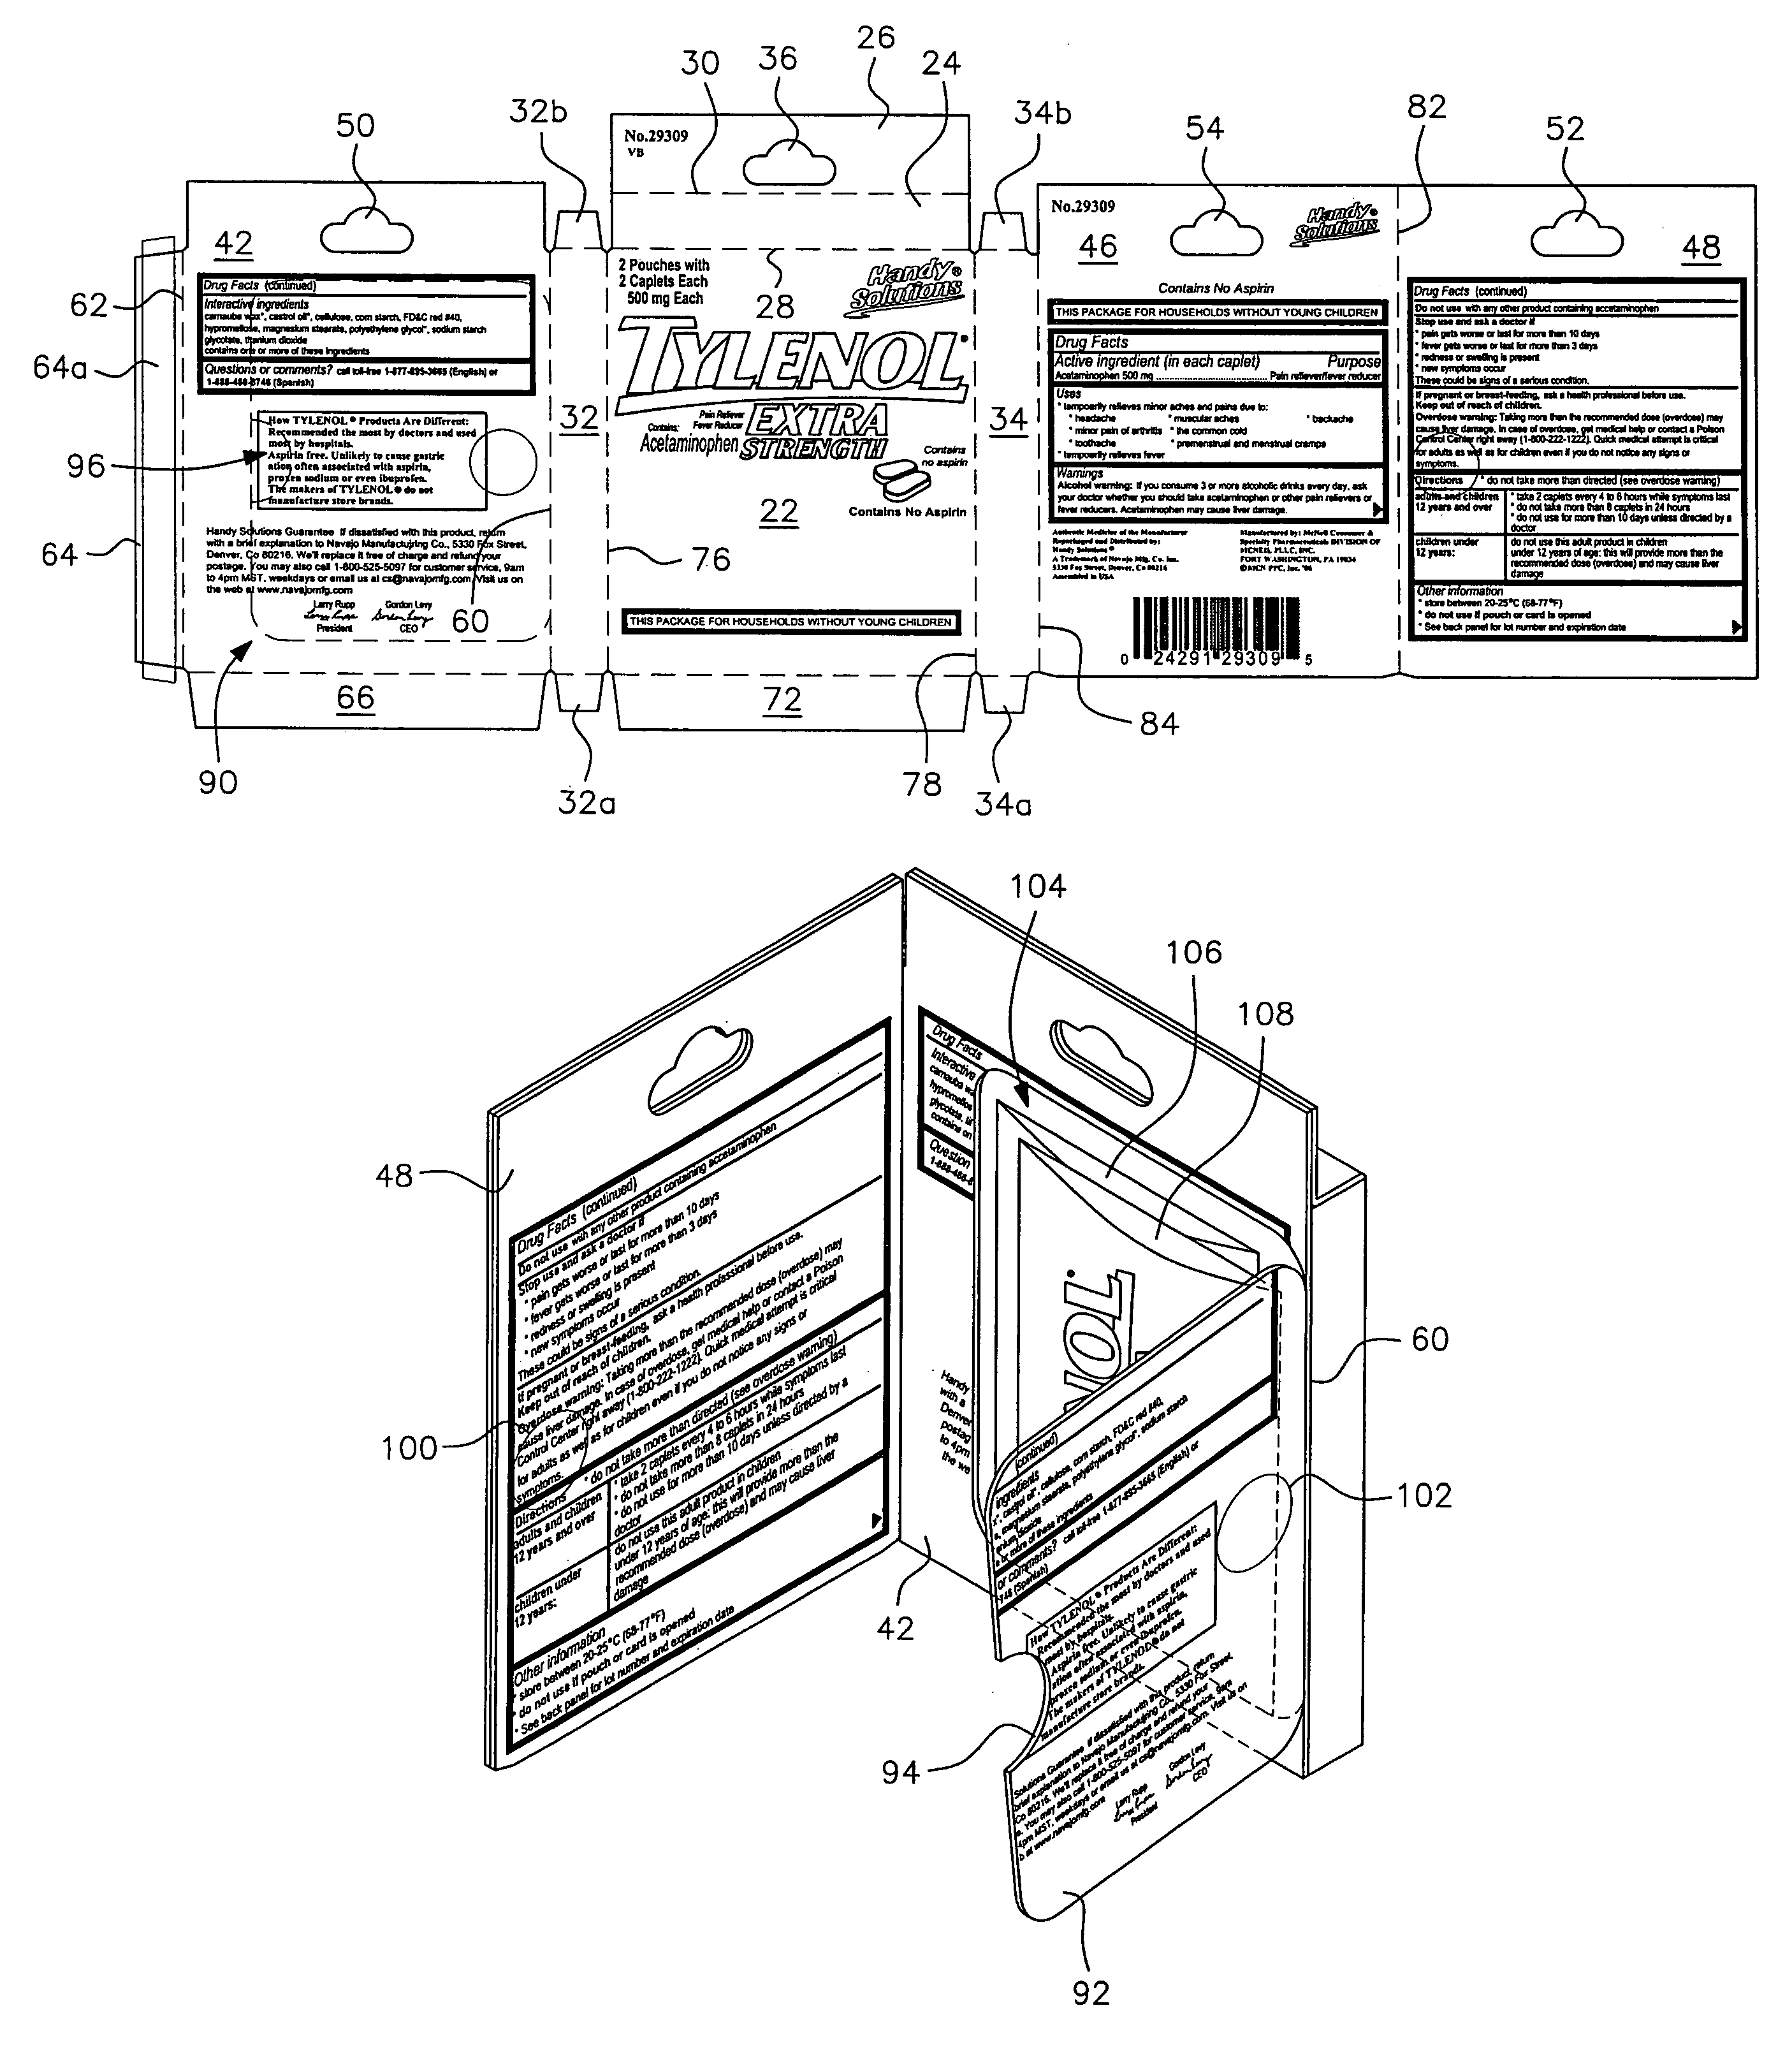 Drug delivery box for individual doses of medicine